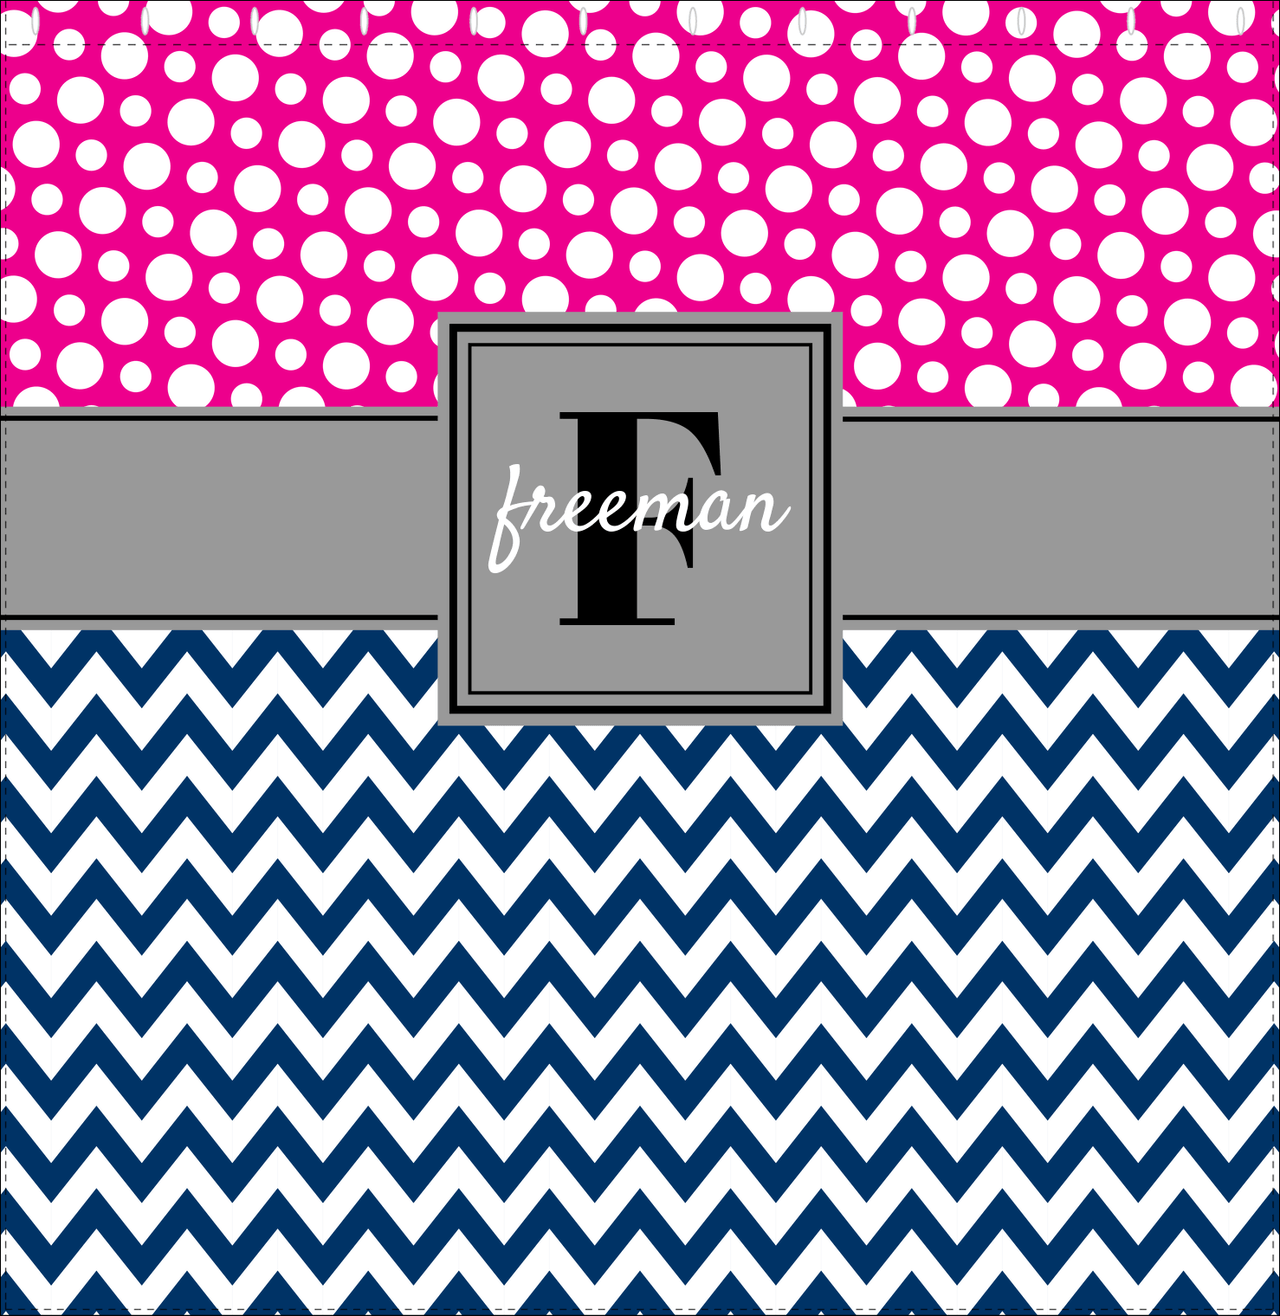 Personalized Polka Dots and Chevron I Shower Curtain - Pink and Navy - Square Nameplate - Decorate View